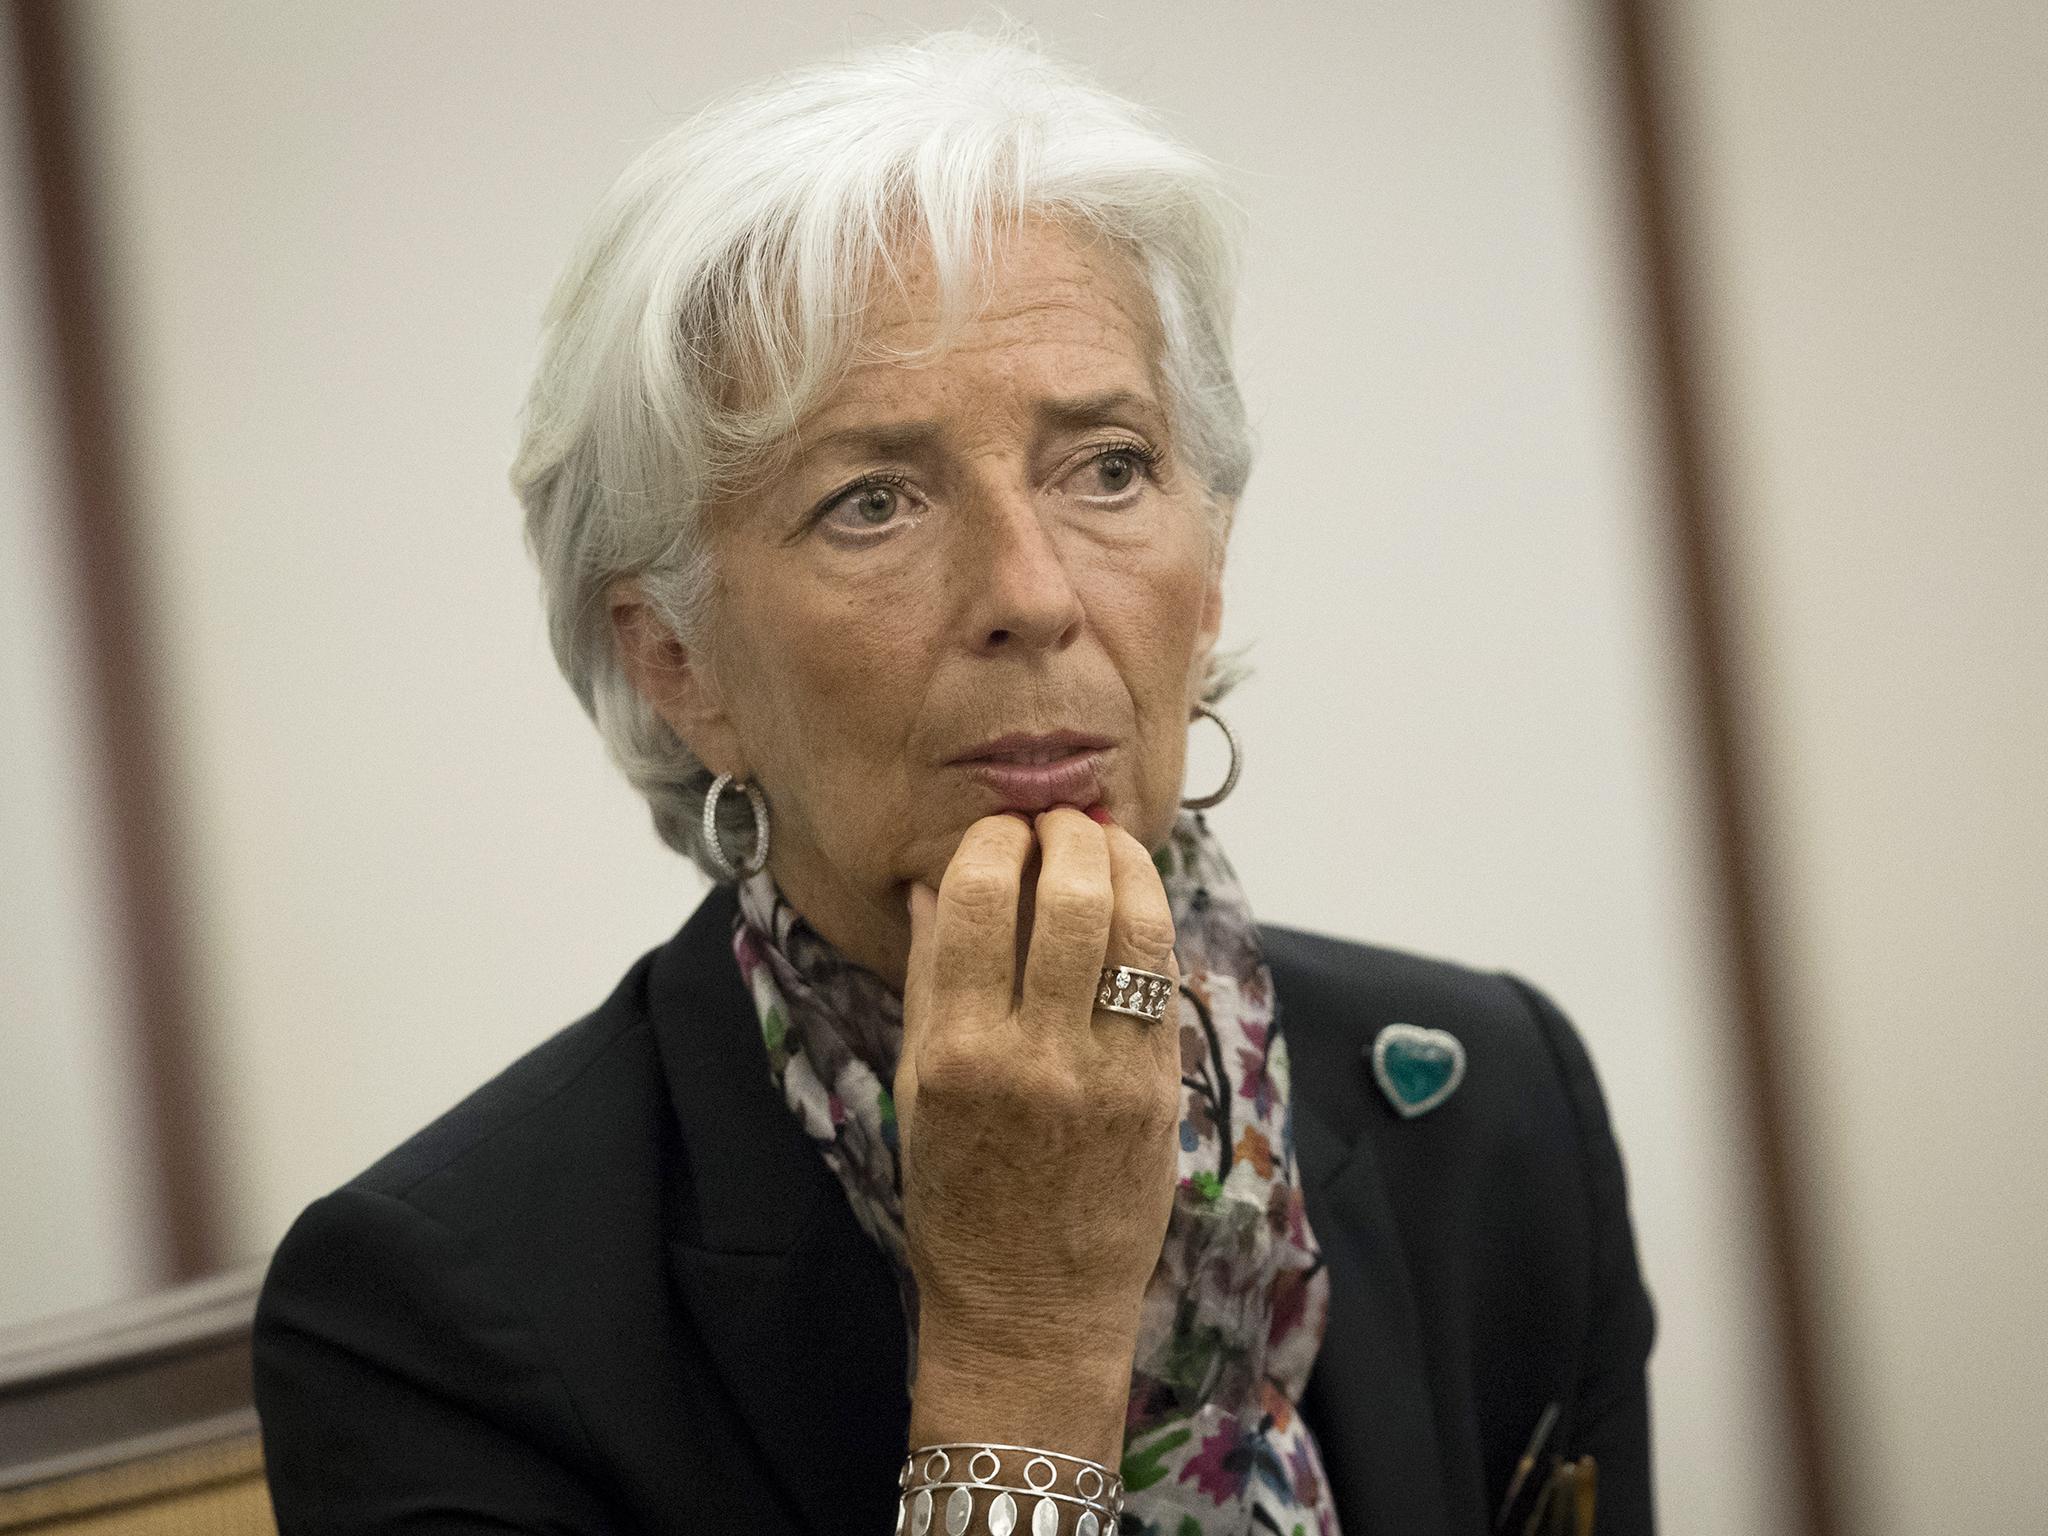 Ms Lagarde said that the “second leg” of Greece’s efforts should be to restructure debt